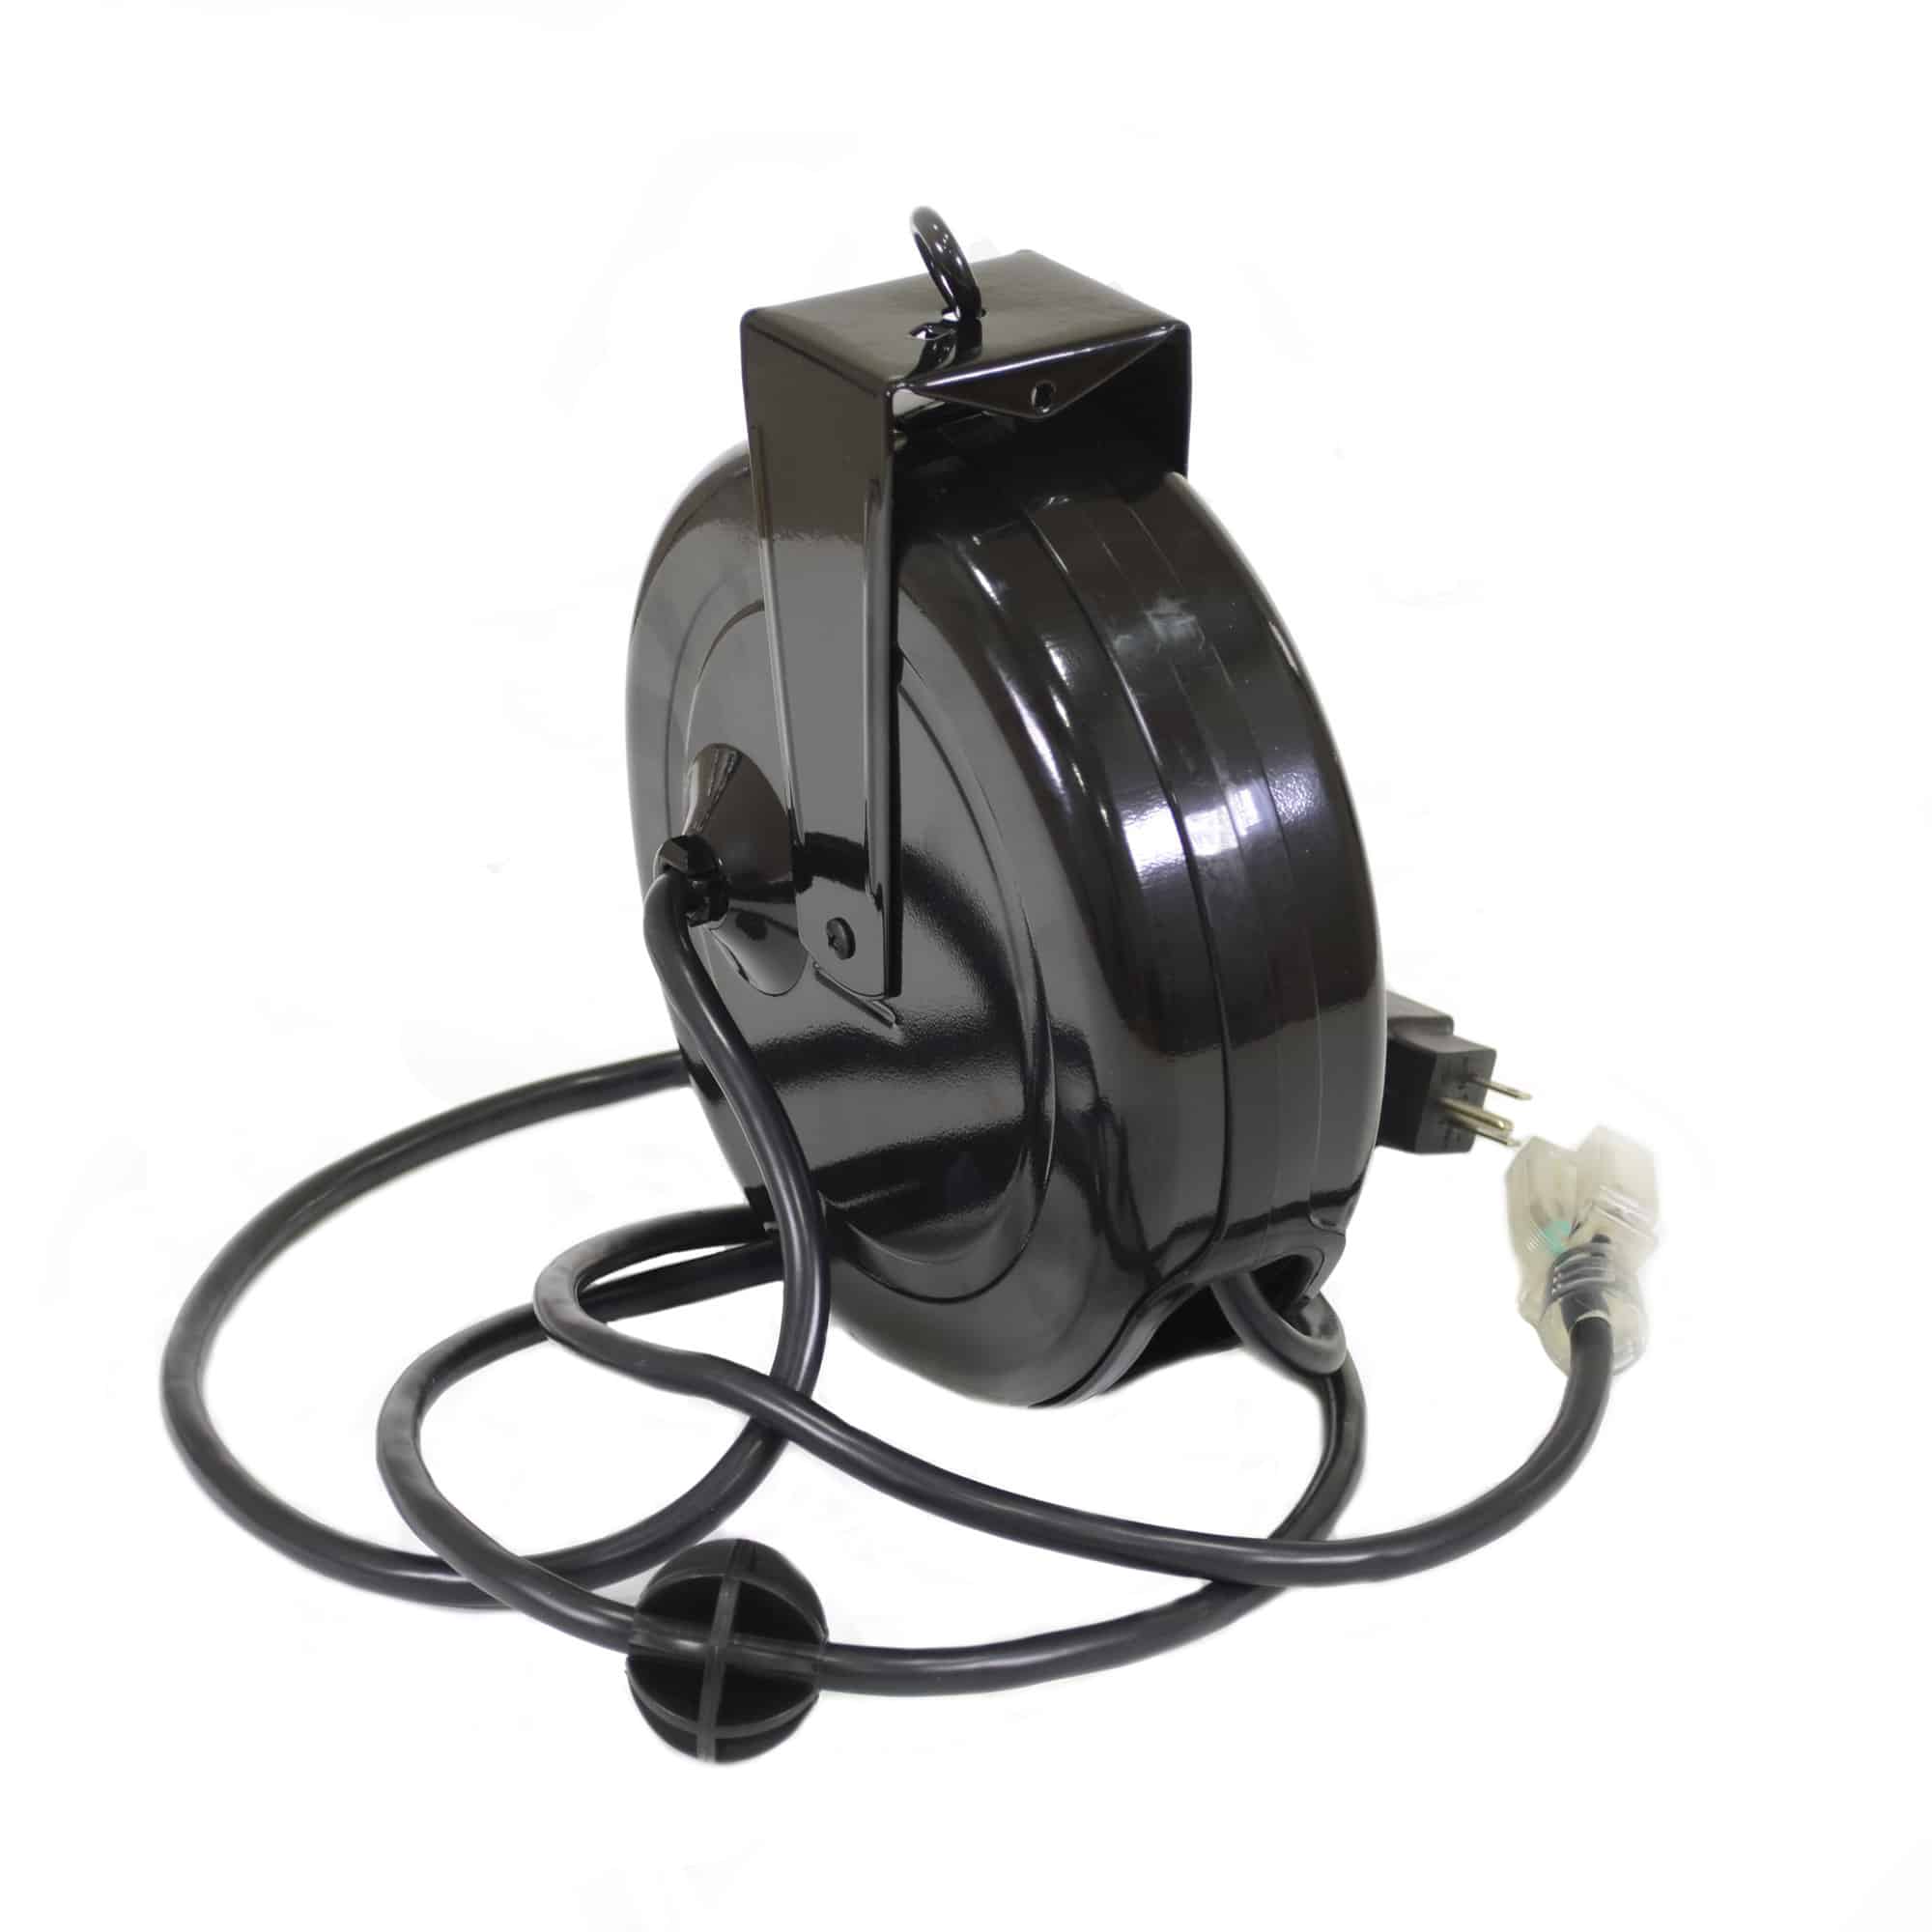 RETRACTABLE CORD REEL, CETL, 125 V/20 A, 1-OUTLET, BLACK, 45 FT L,  THERMOPLASTIC